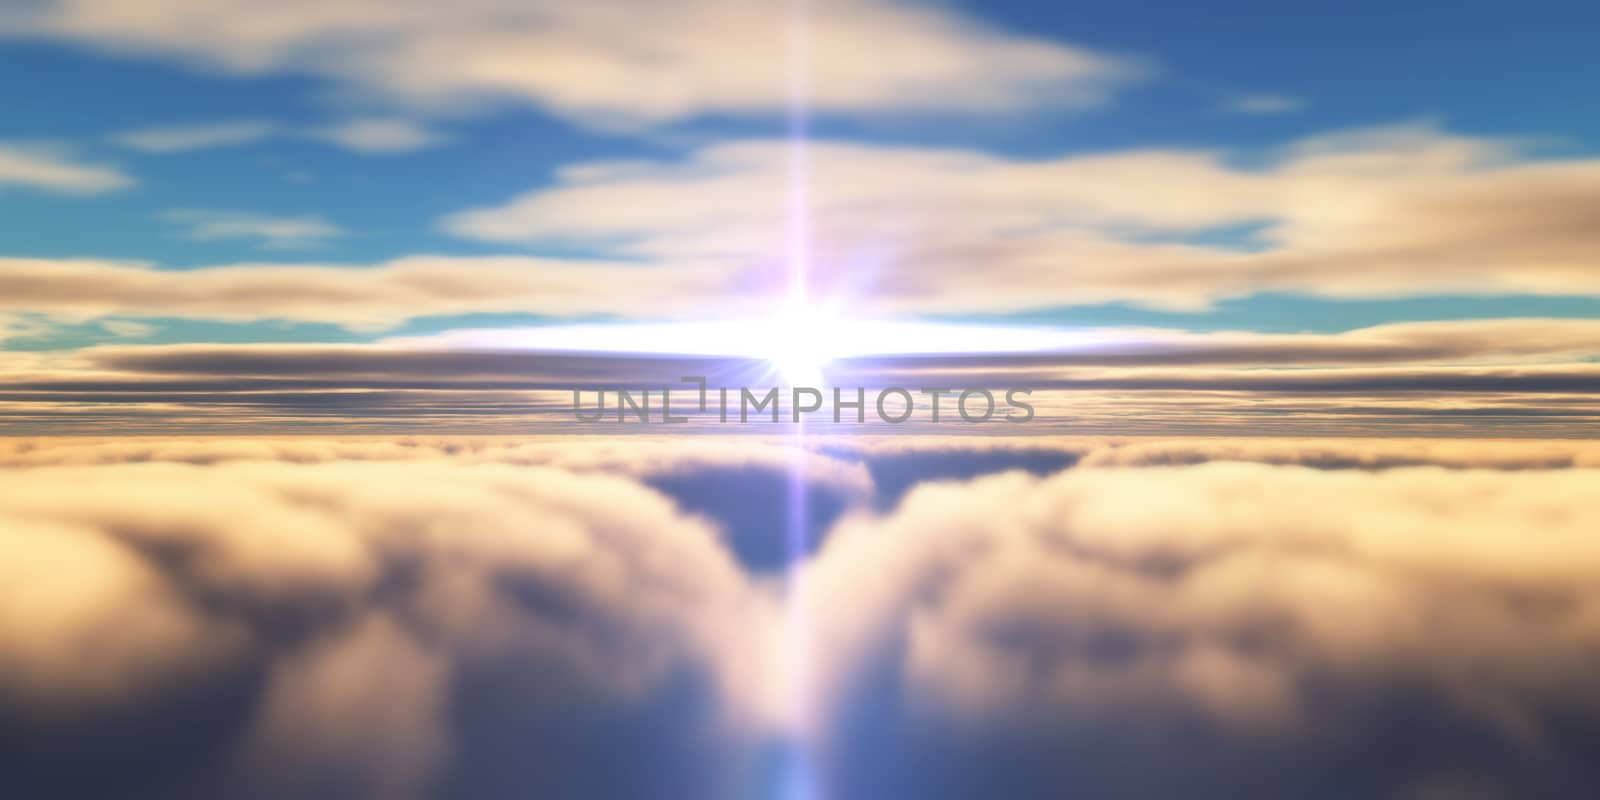 Beautiful aerial view above clouds with sunset. 3d illustration